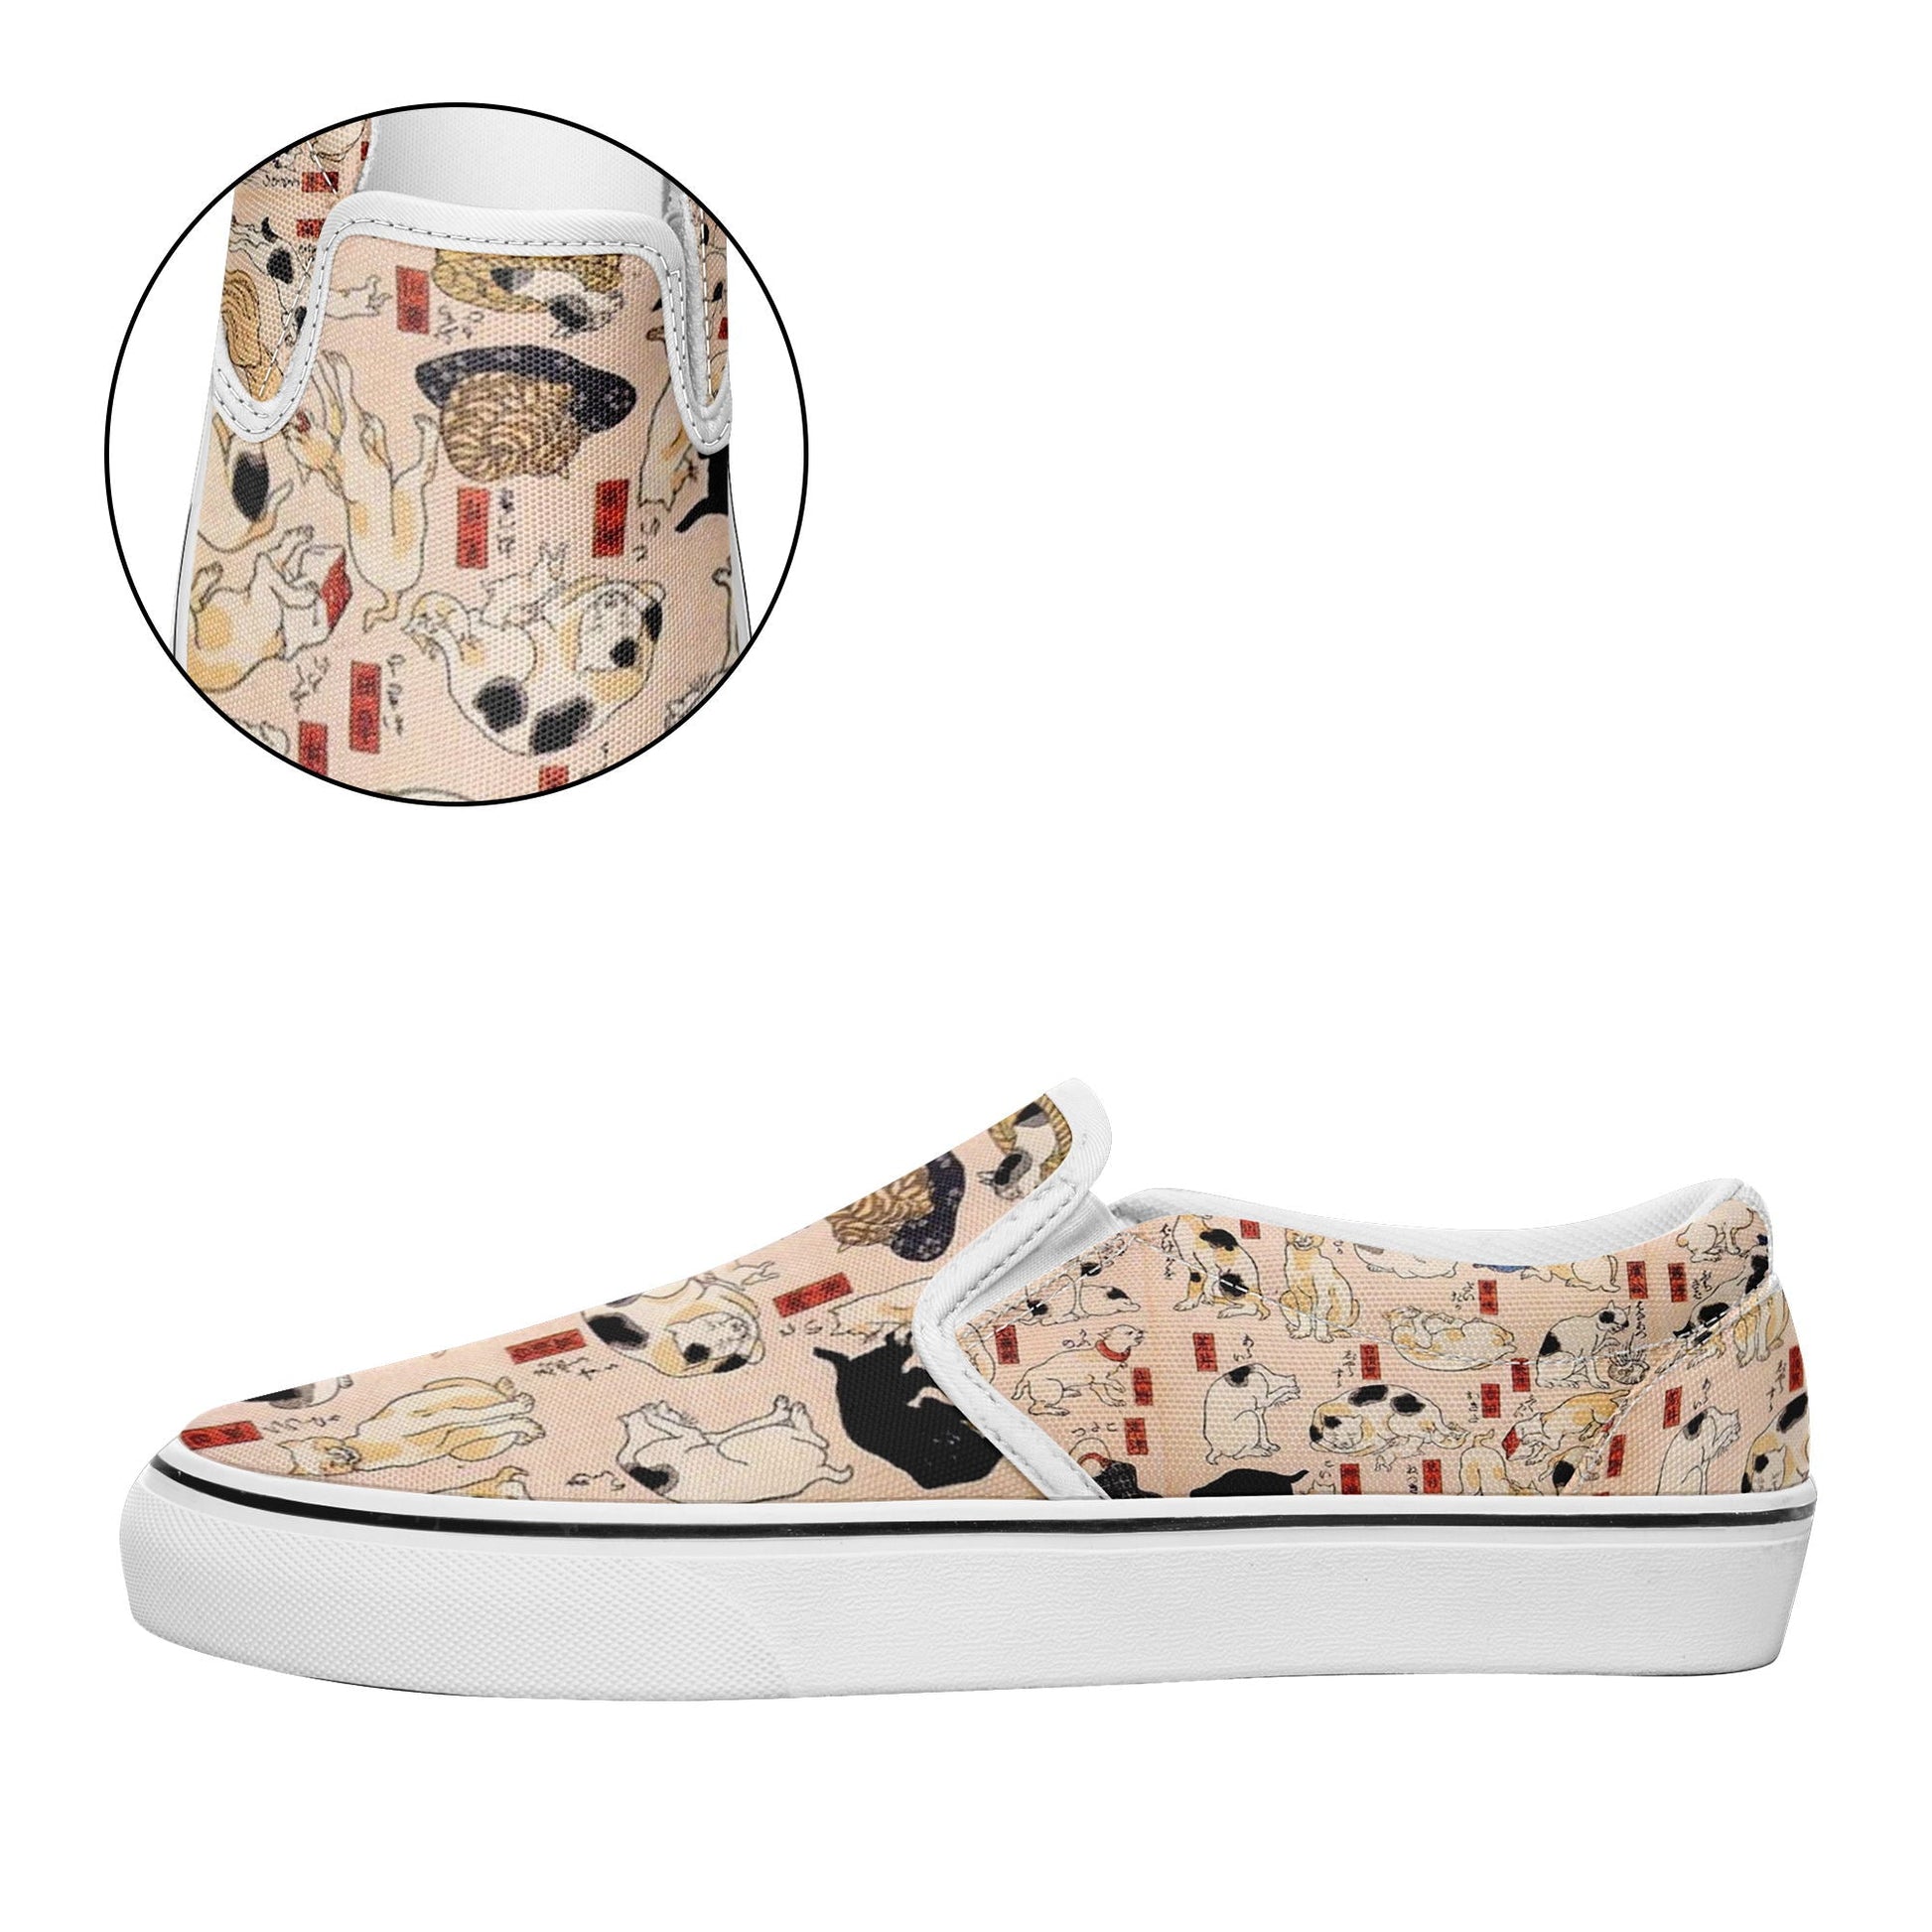 pod ukiyoe sneakers 7216 personalized printed kuniyoshi utagawa's cats suggested as the fifty three stations of the tokaido casual shoes white soles 7